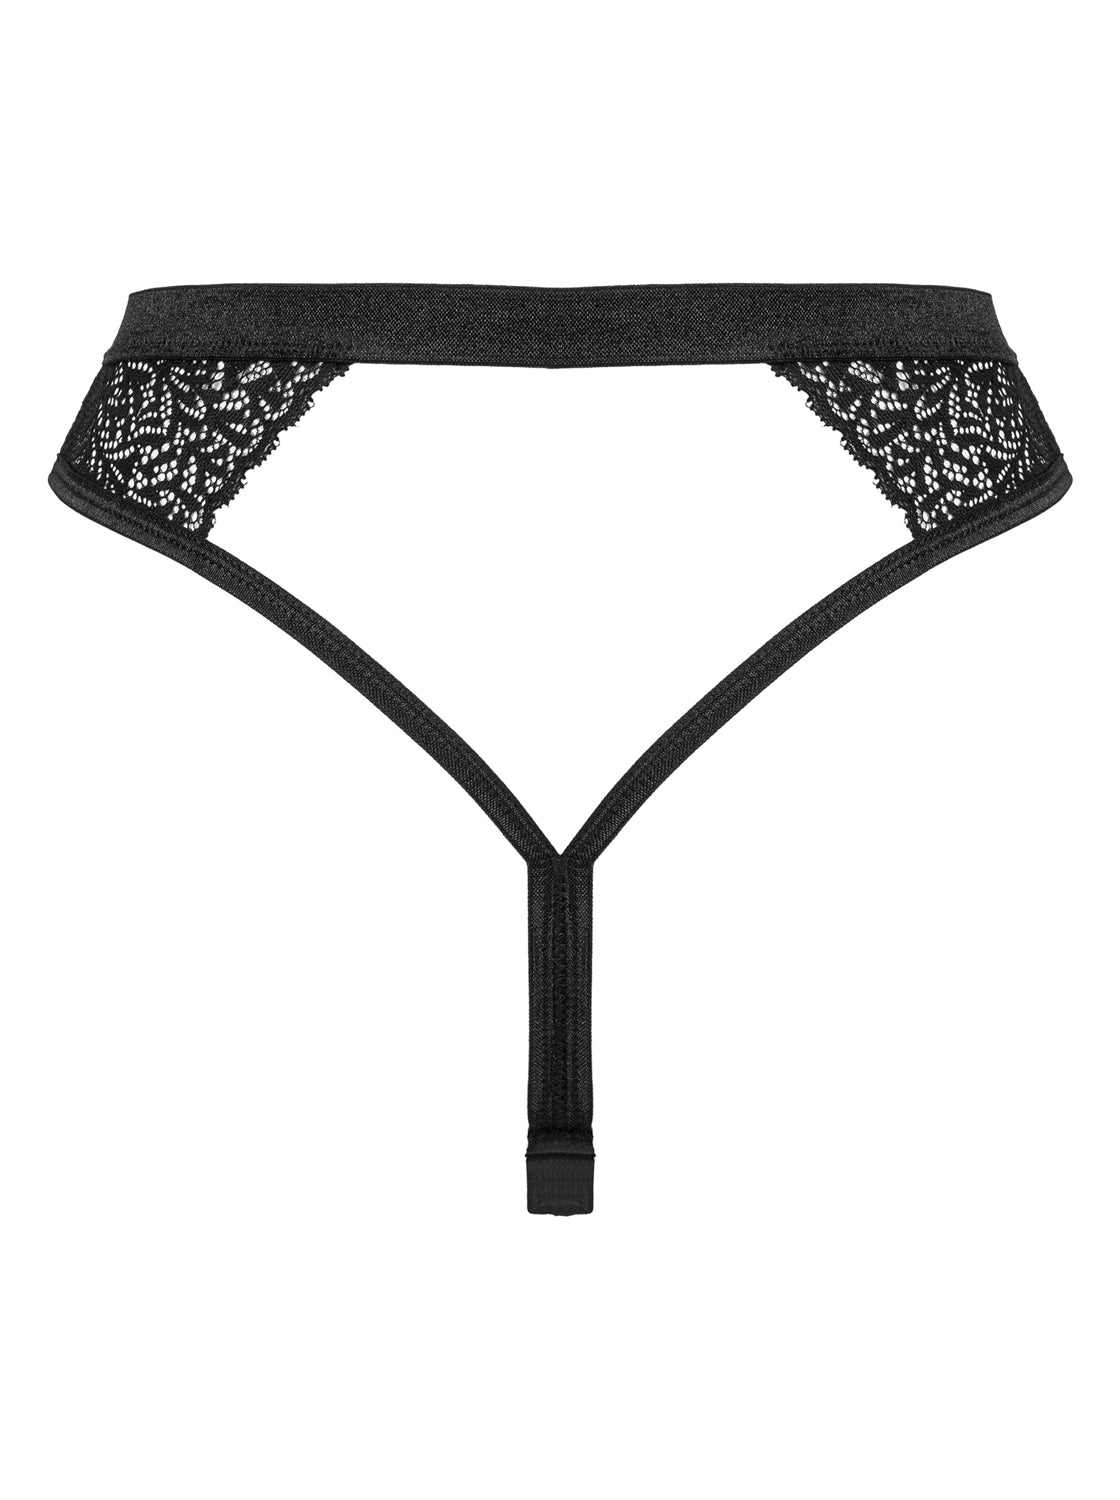 Yaskana an extraordinary black thong made of soft and elastic material with sensual lace